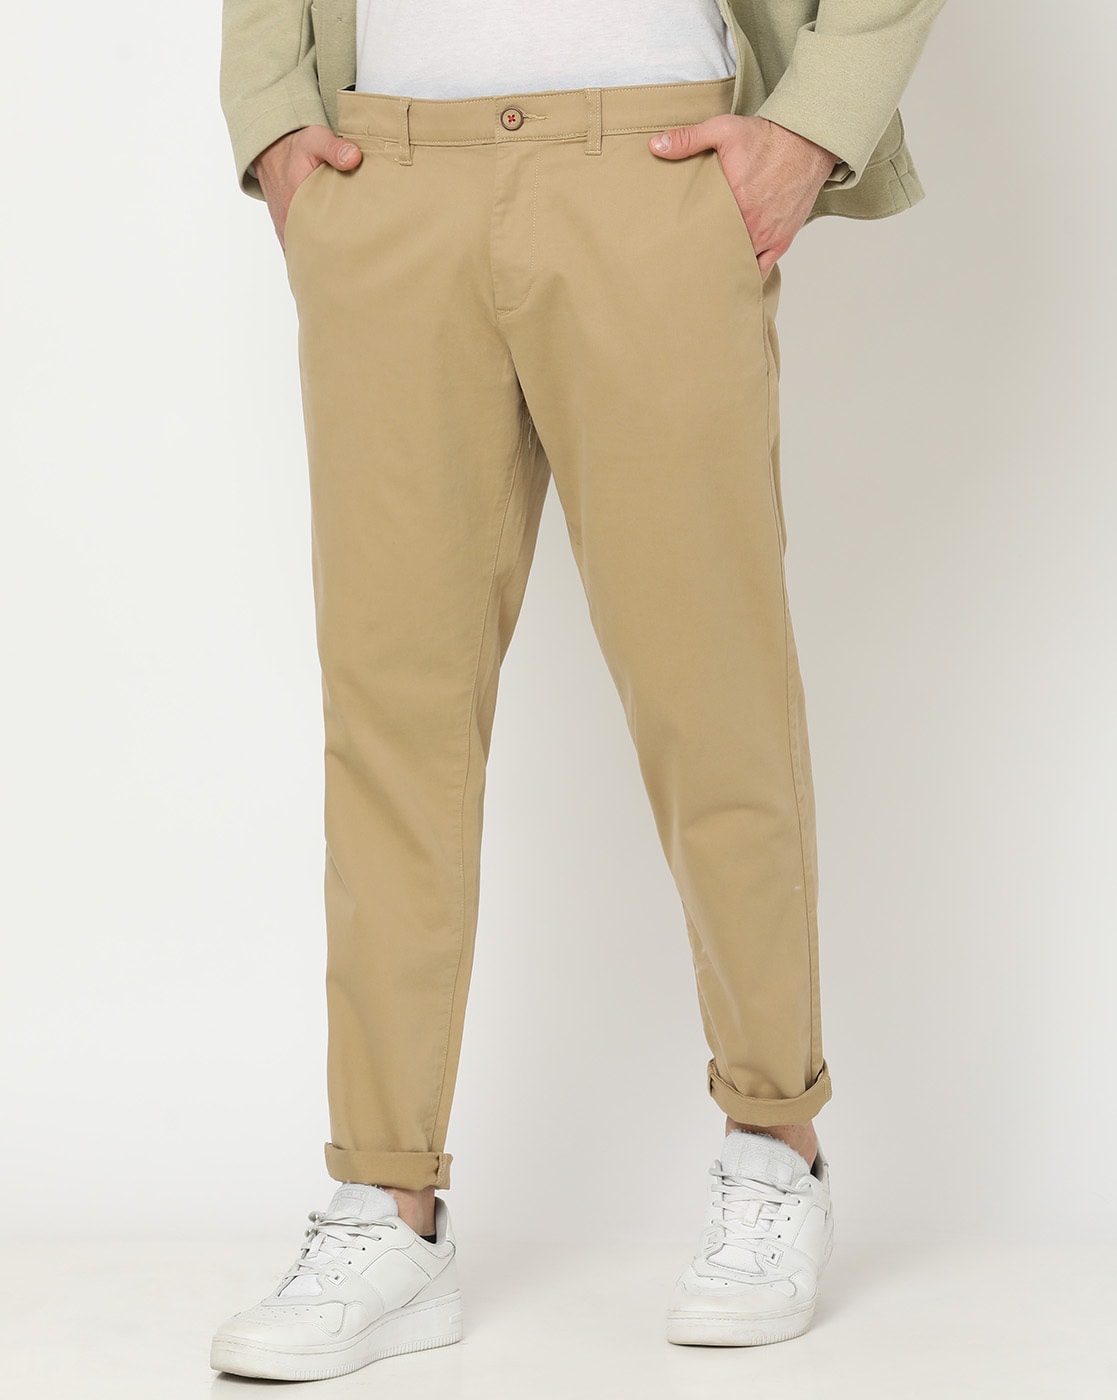 Buy Green Trousers & Pants for Men by NETPLAY Online | Ajio.com